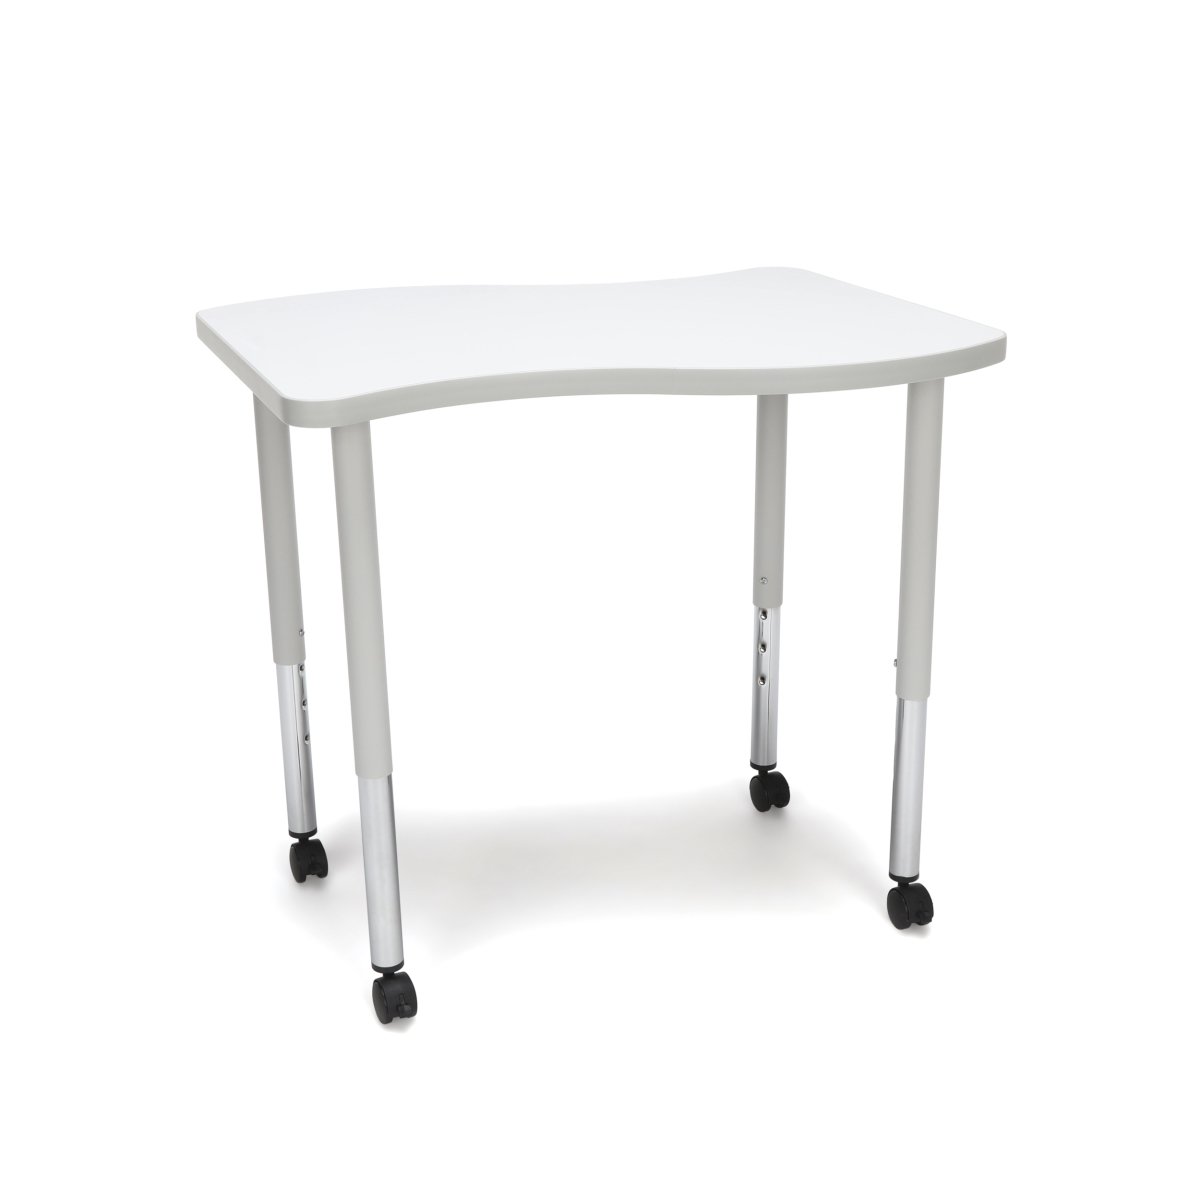 Wave-s-llc-wht Adapt Series Small Wave Standard Table - 25-33 In. Height Adjustable Desk With Casters, White